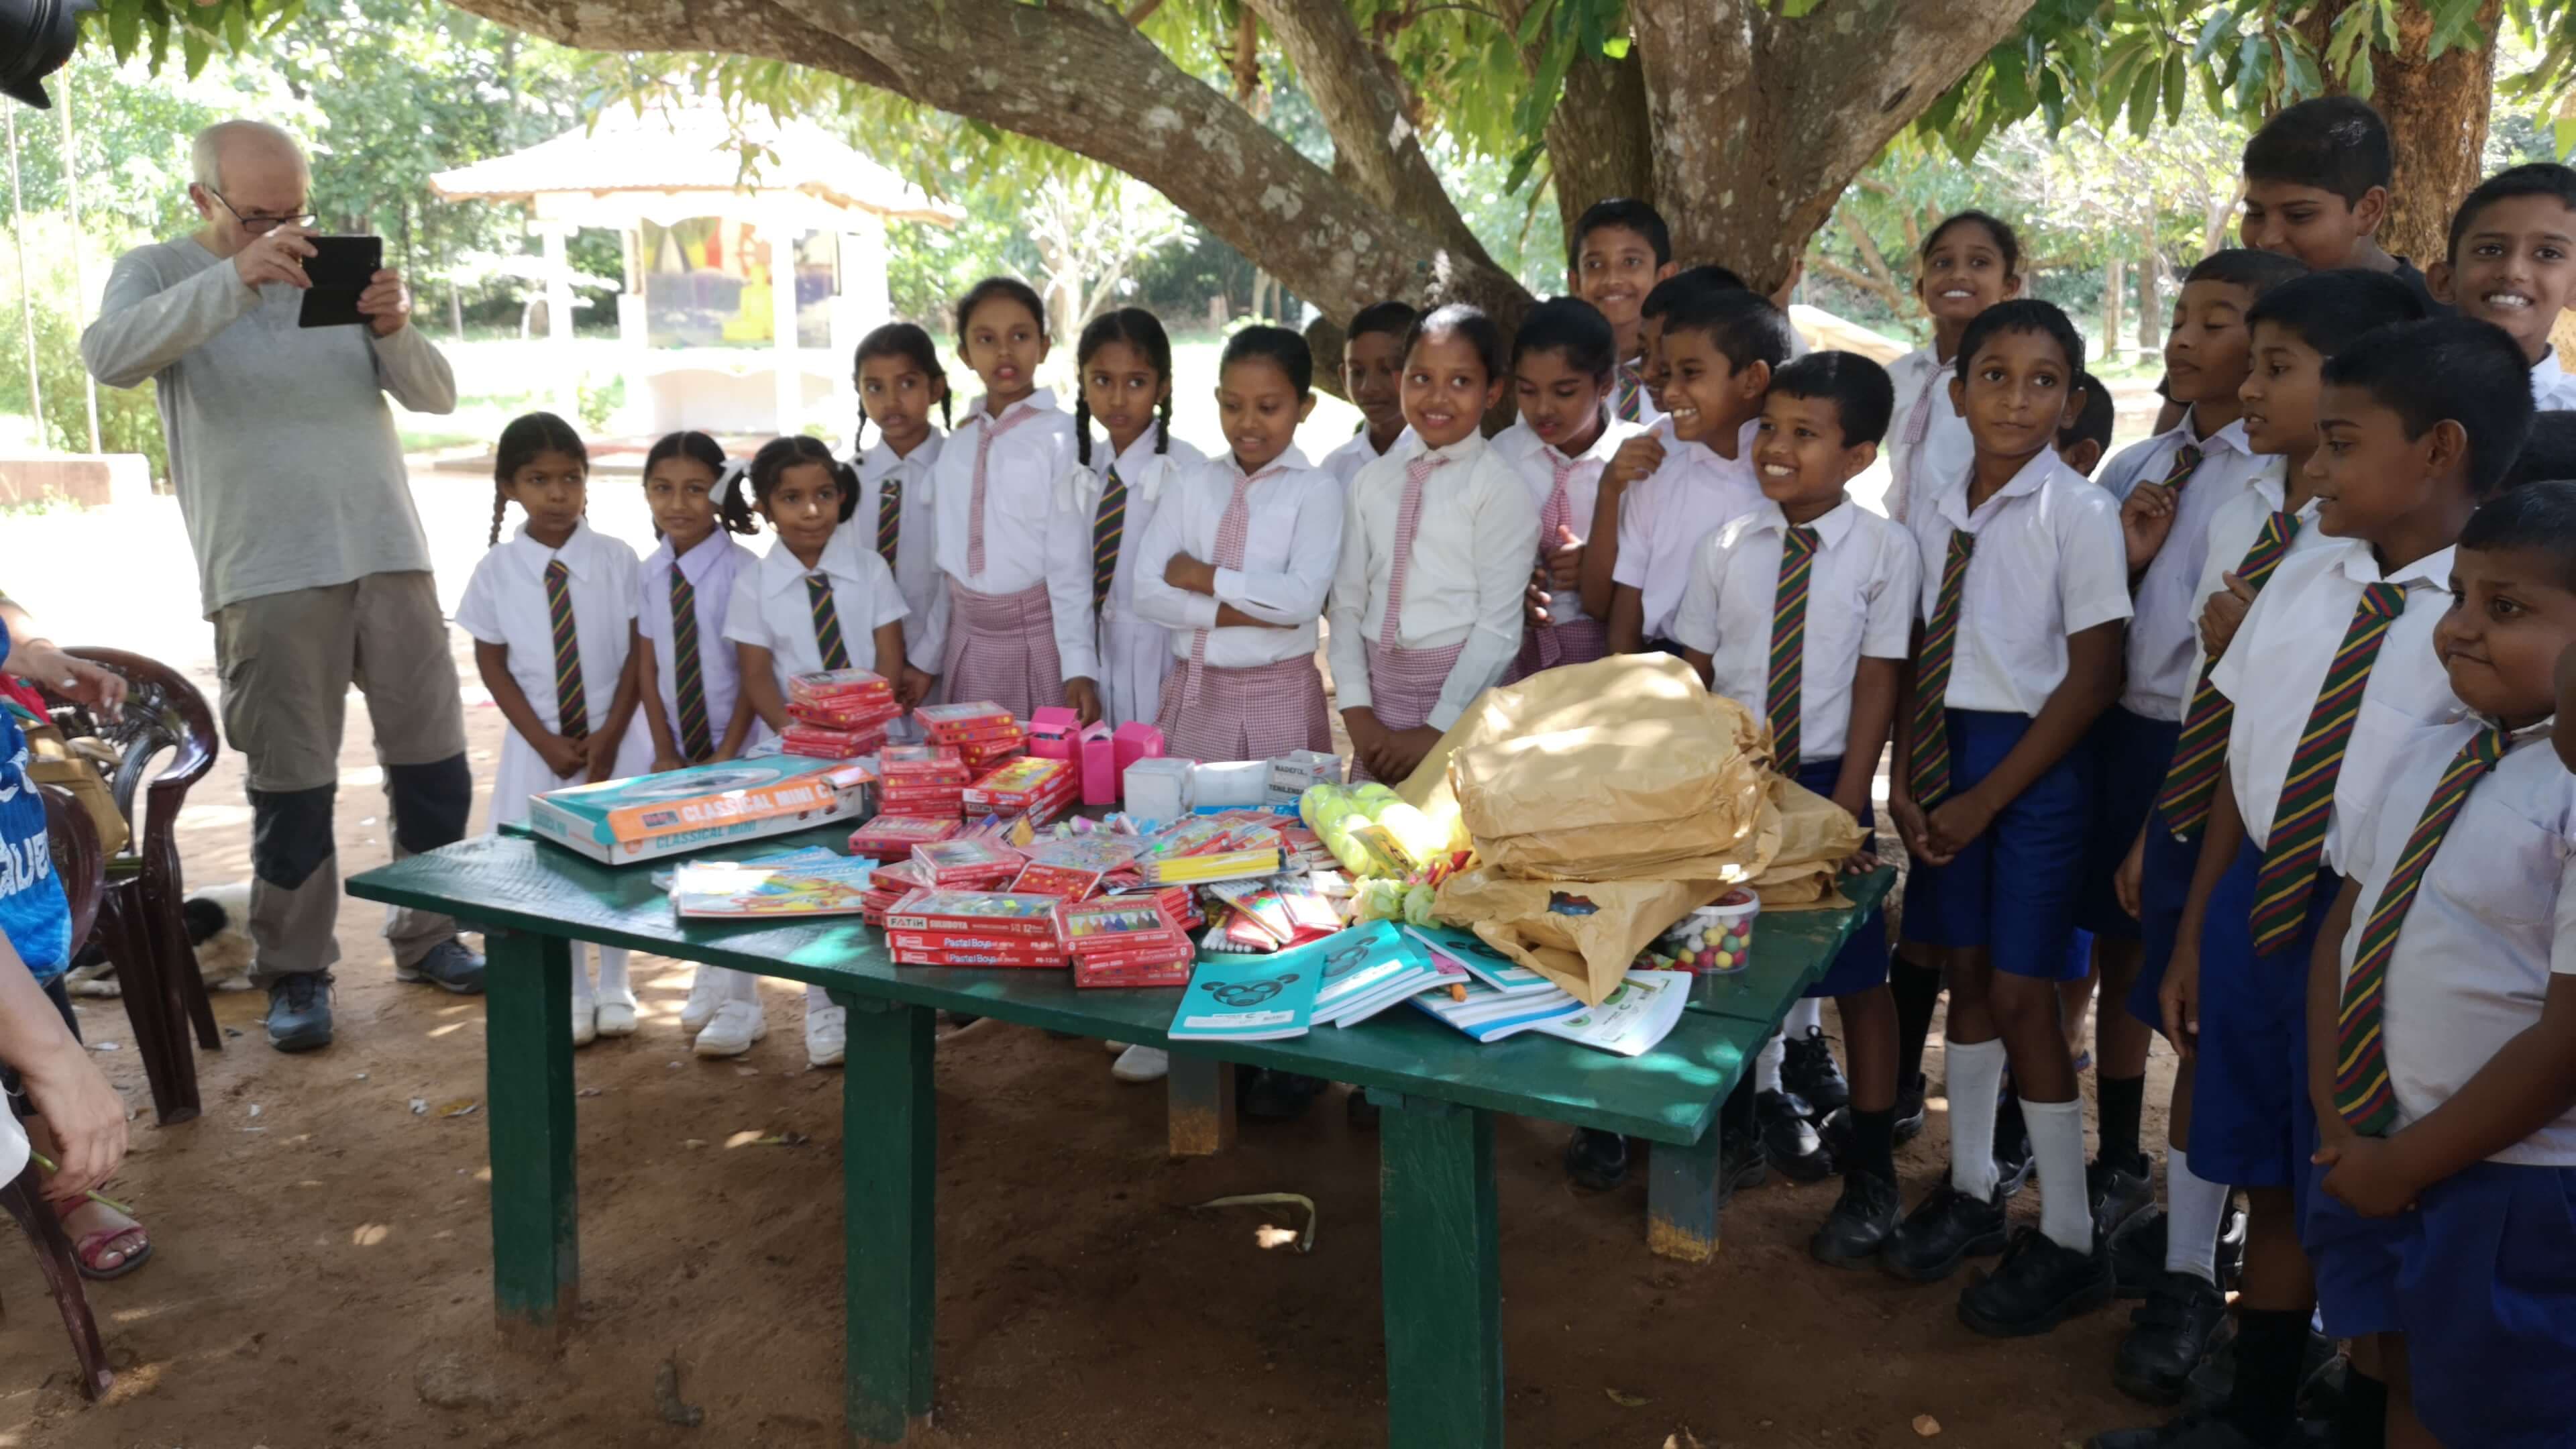 Participating in a charity giveaway organized for school kids, Sri Lanka.